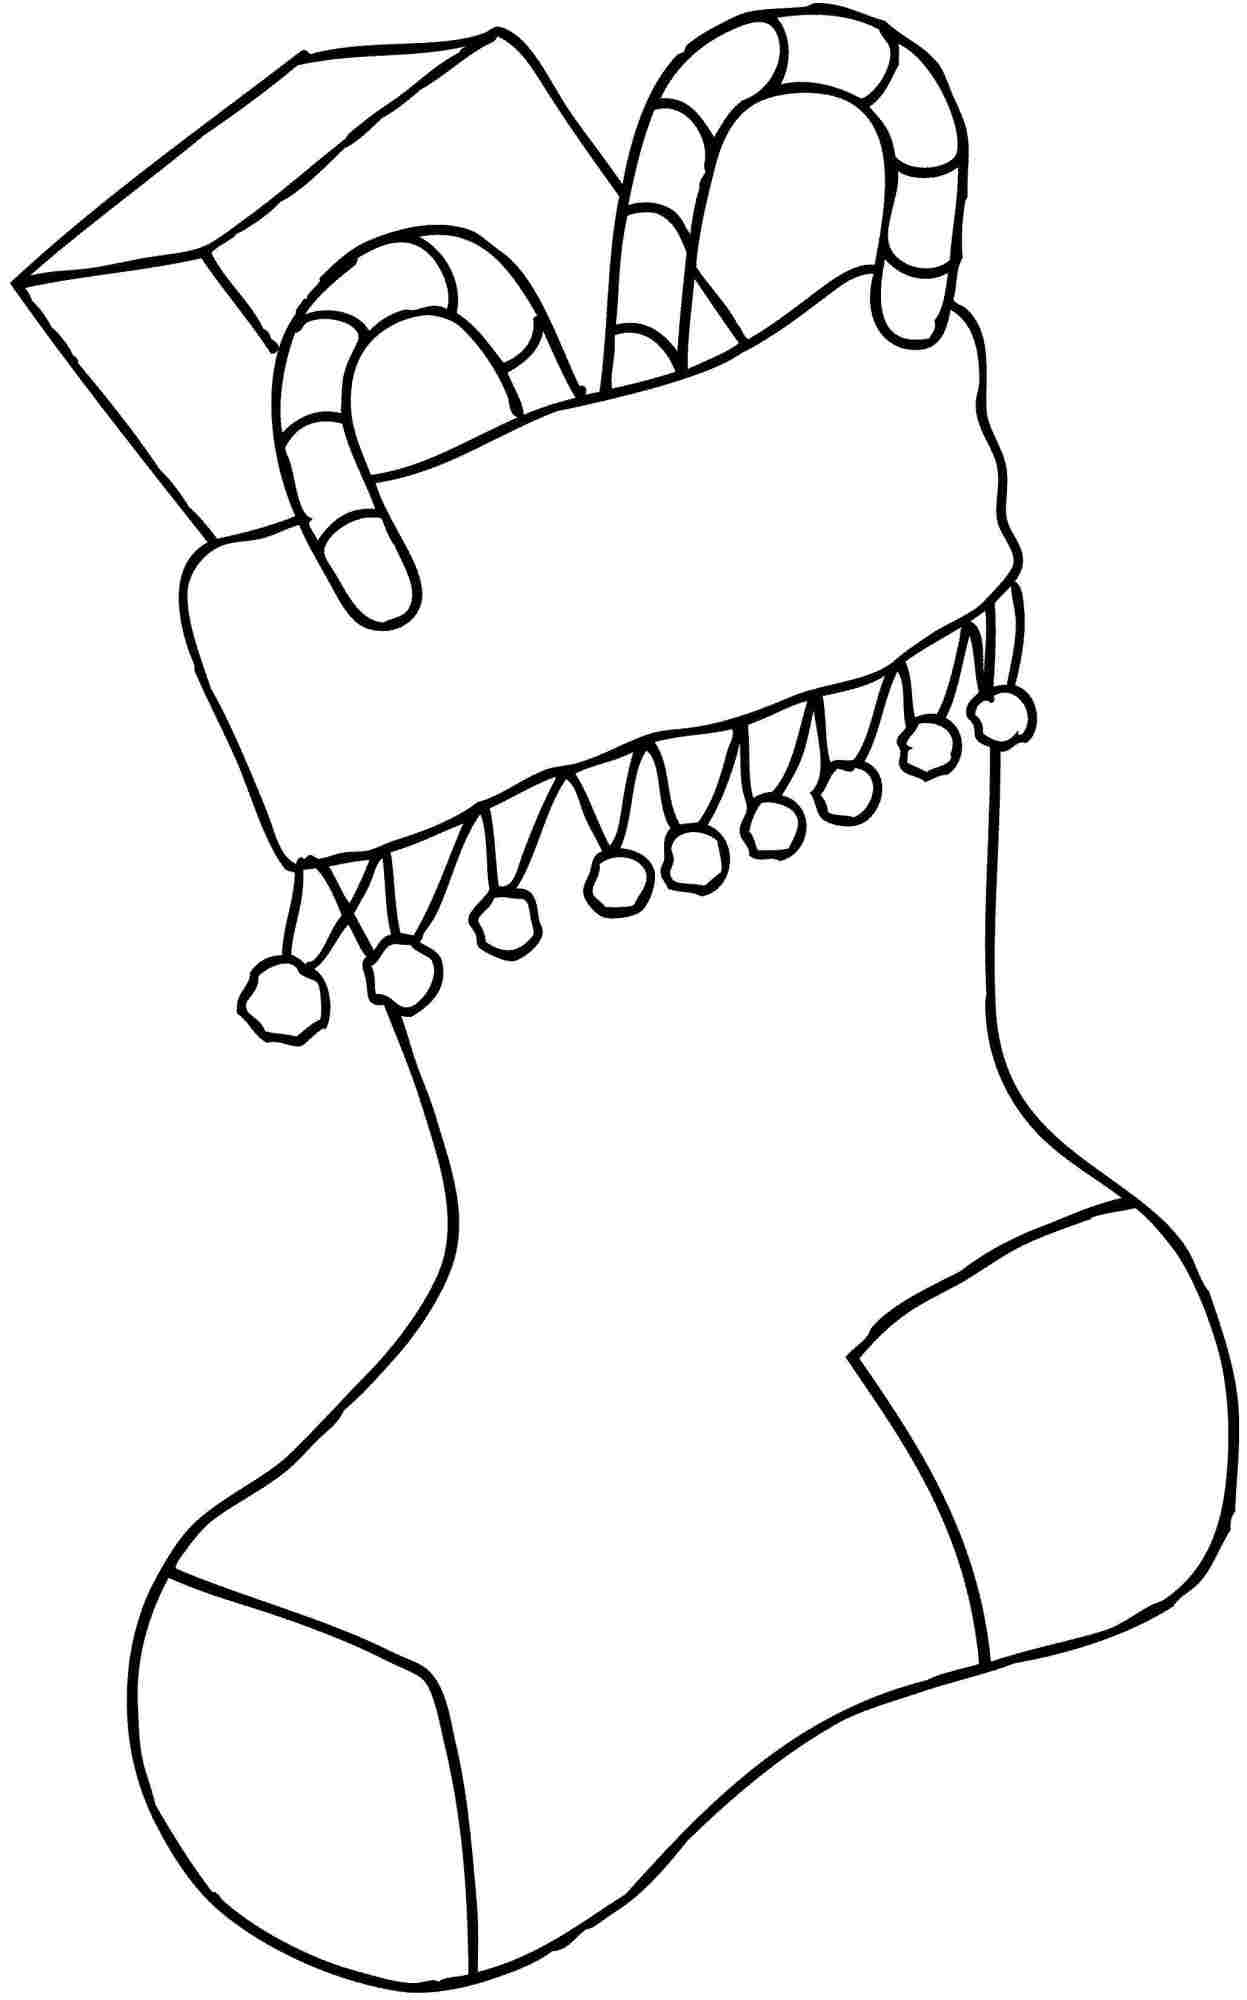 Plain Christmas Stocking Coloring Pages at Free